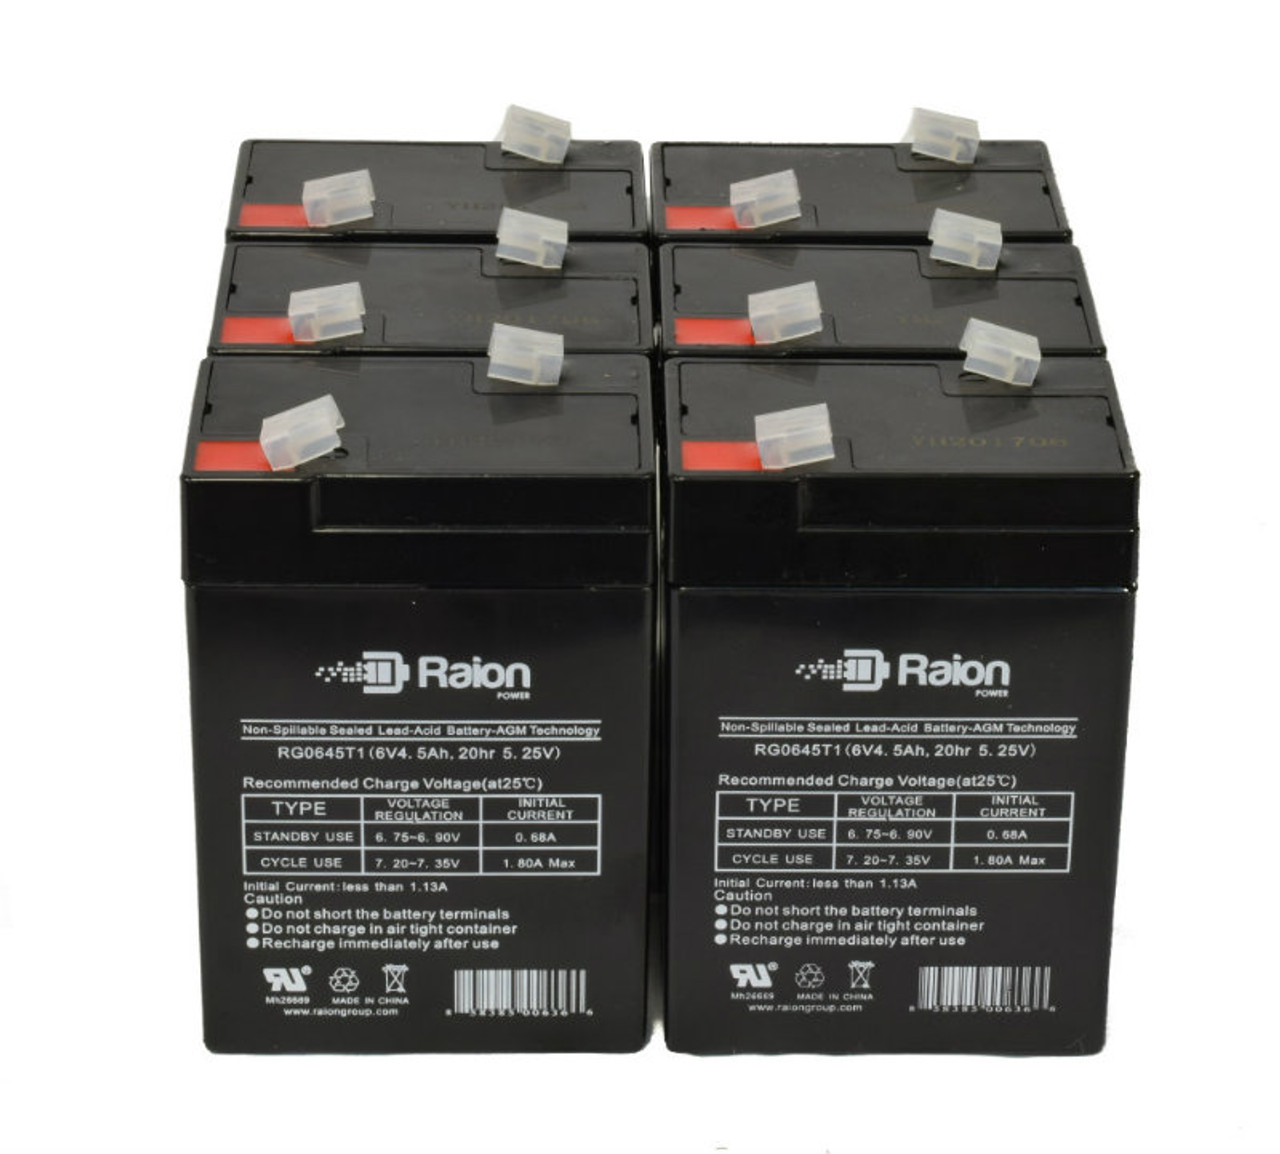 Raion Power 6 Volt 4.5Ah RG0645T1 Replacement Battery for Vision CP650 - 6 Pack